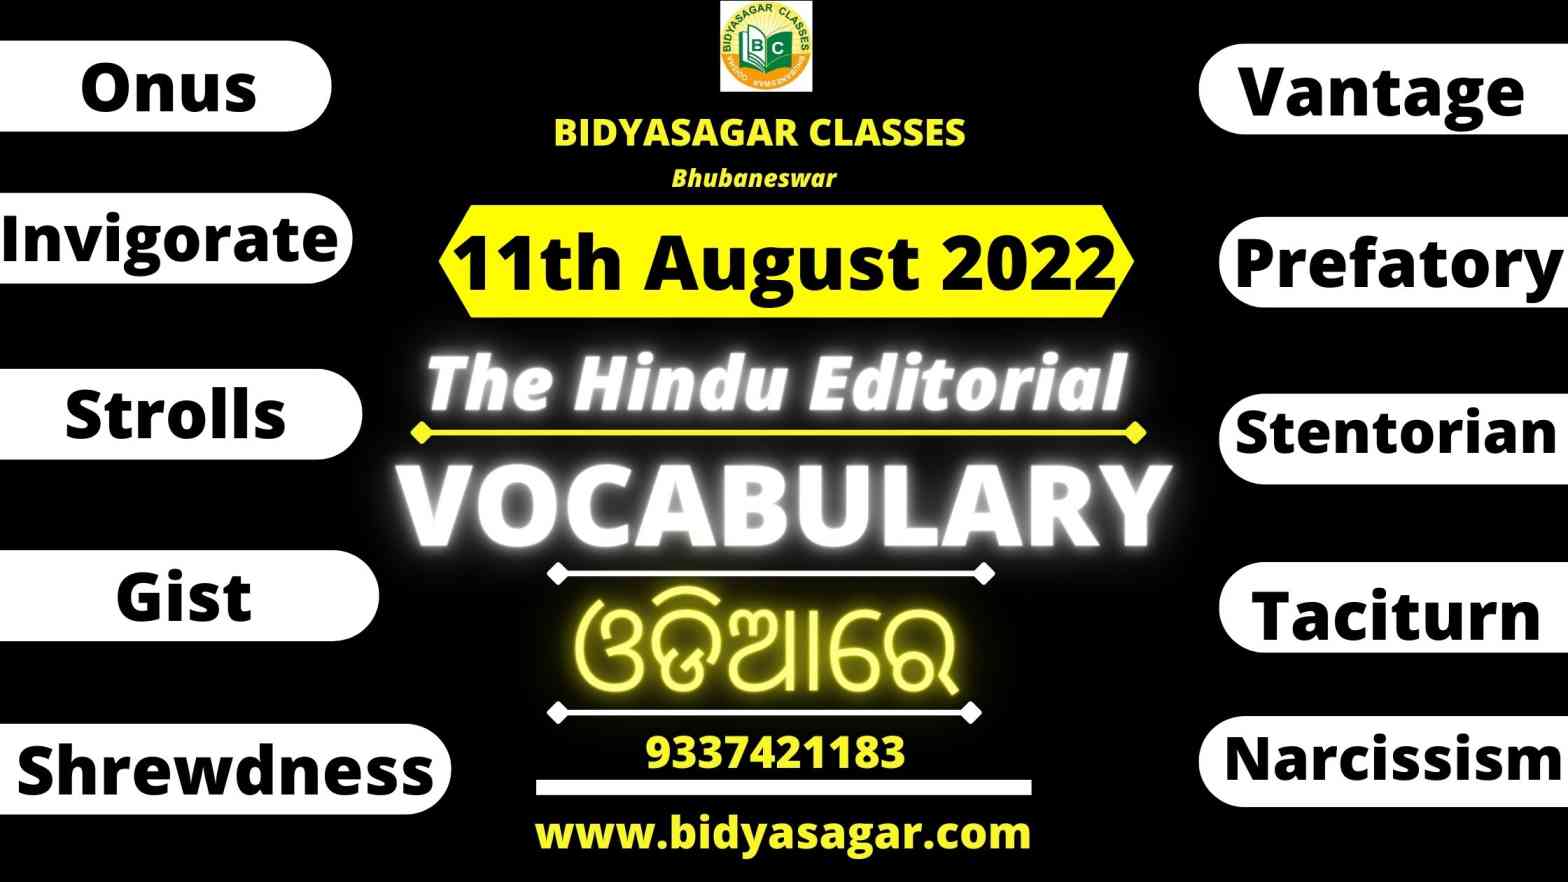 The Hindu Editorial Vocabulary of 11th August 2022